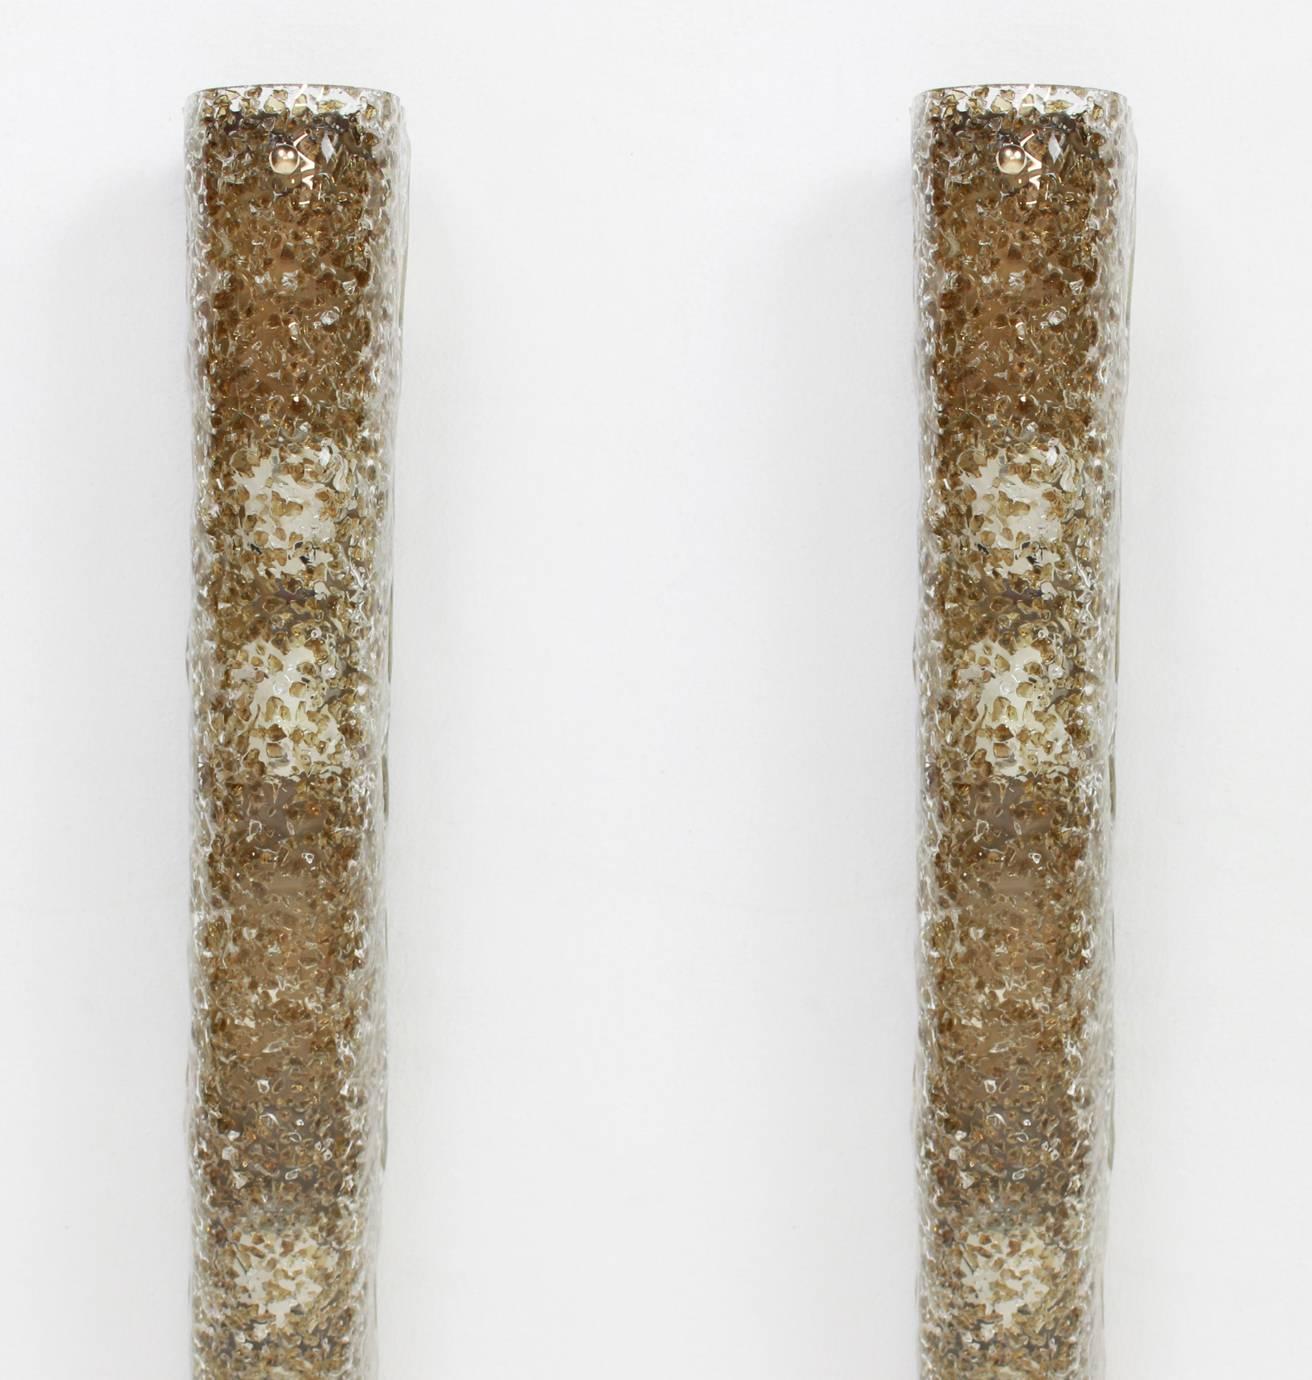 Pair of thick textured Murano glass wall sconces made by Hillebrand Leuchten, Germany, circa 1970-1979.

High quality and in very good condition. Cleaned, well-wired and ready to use. 

The wonderful dark toned glass fixtured on a dark-toned brass